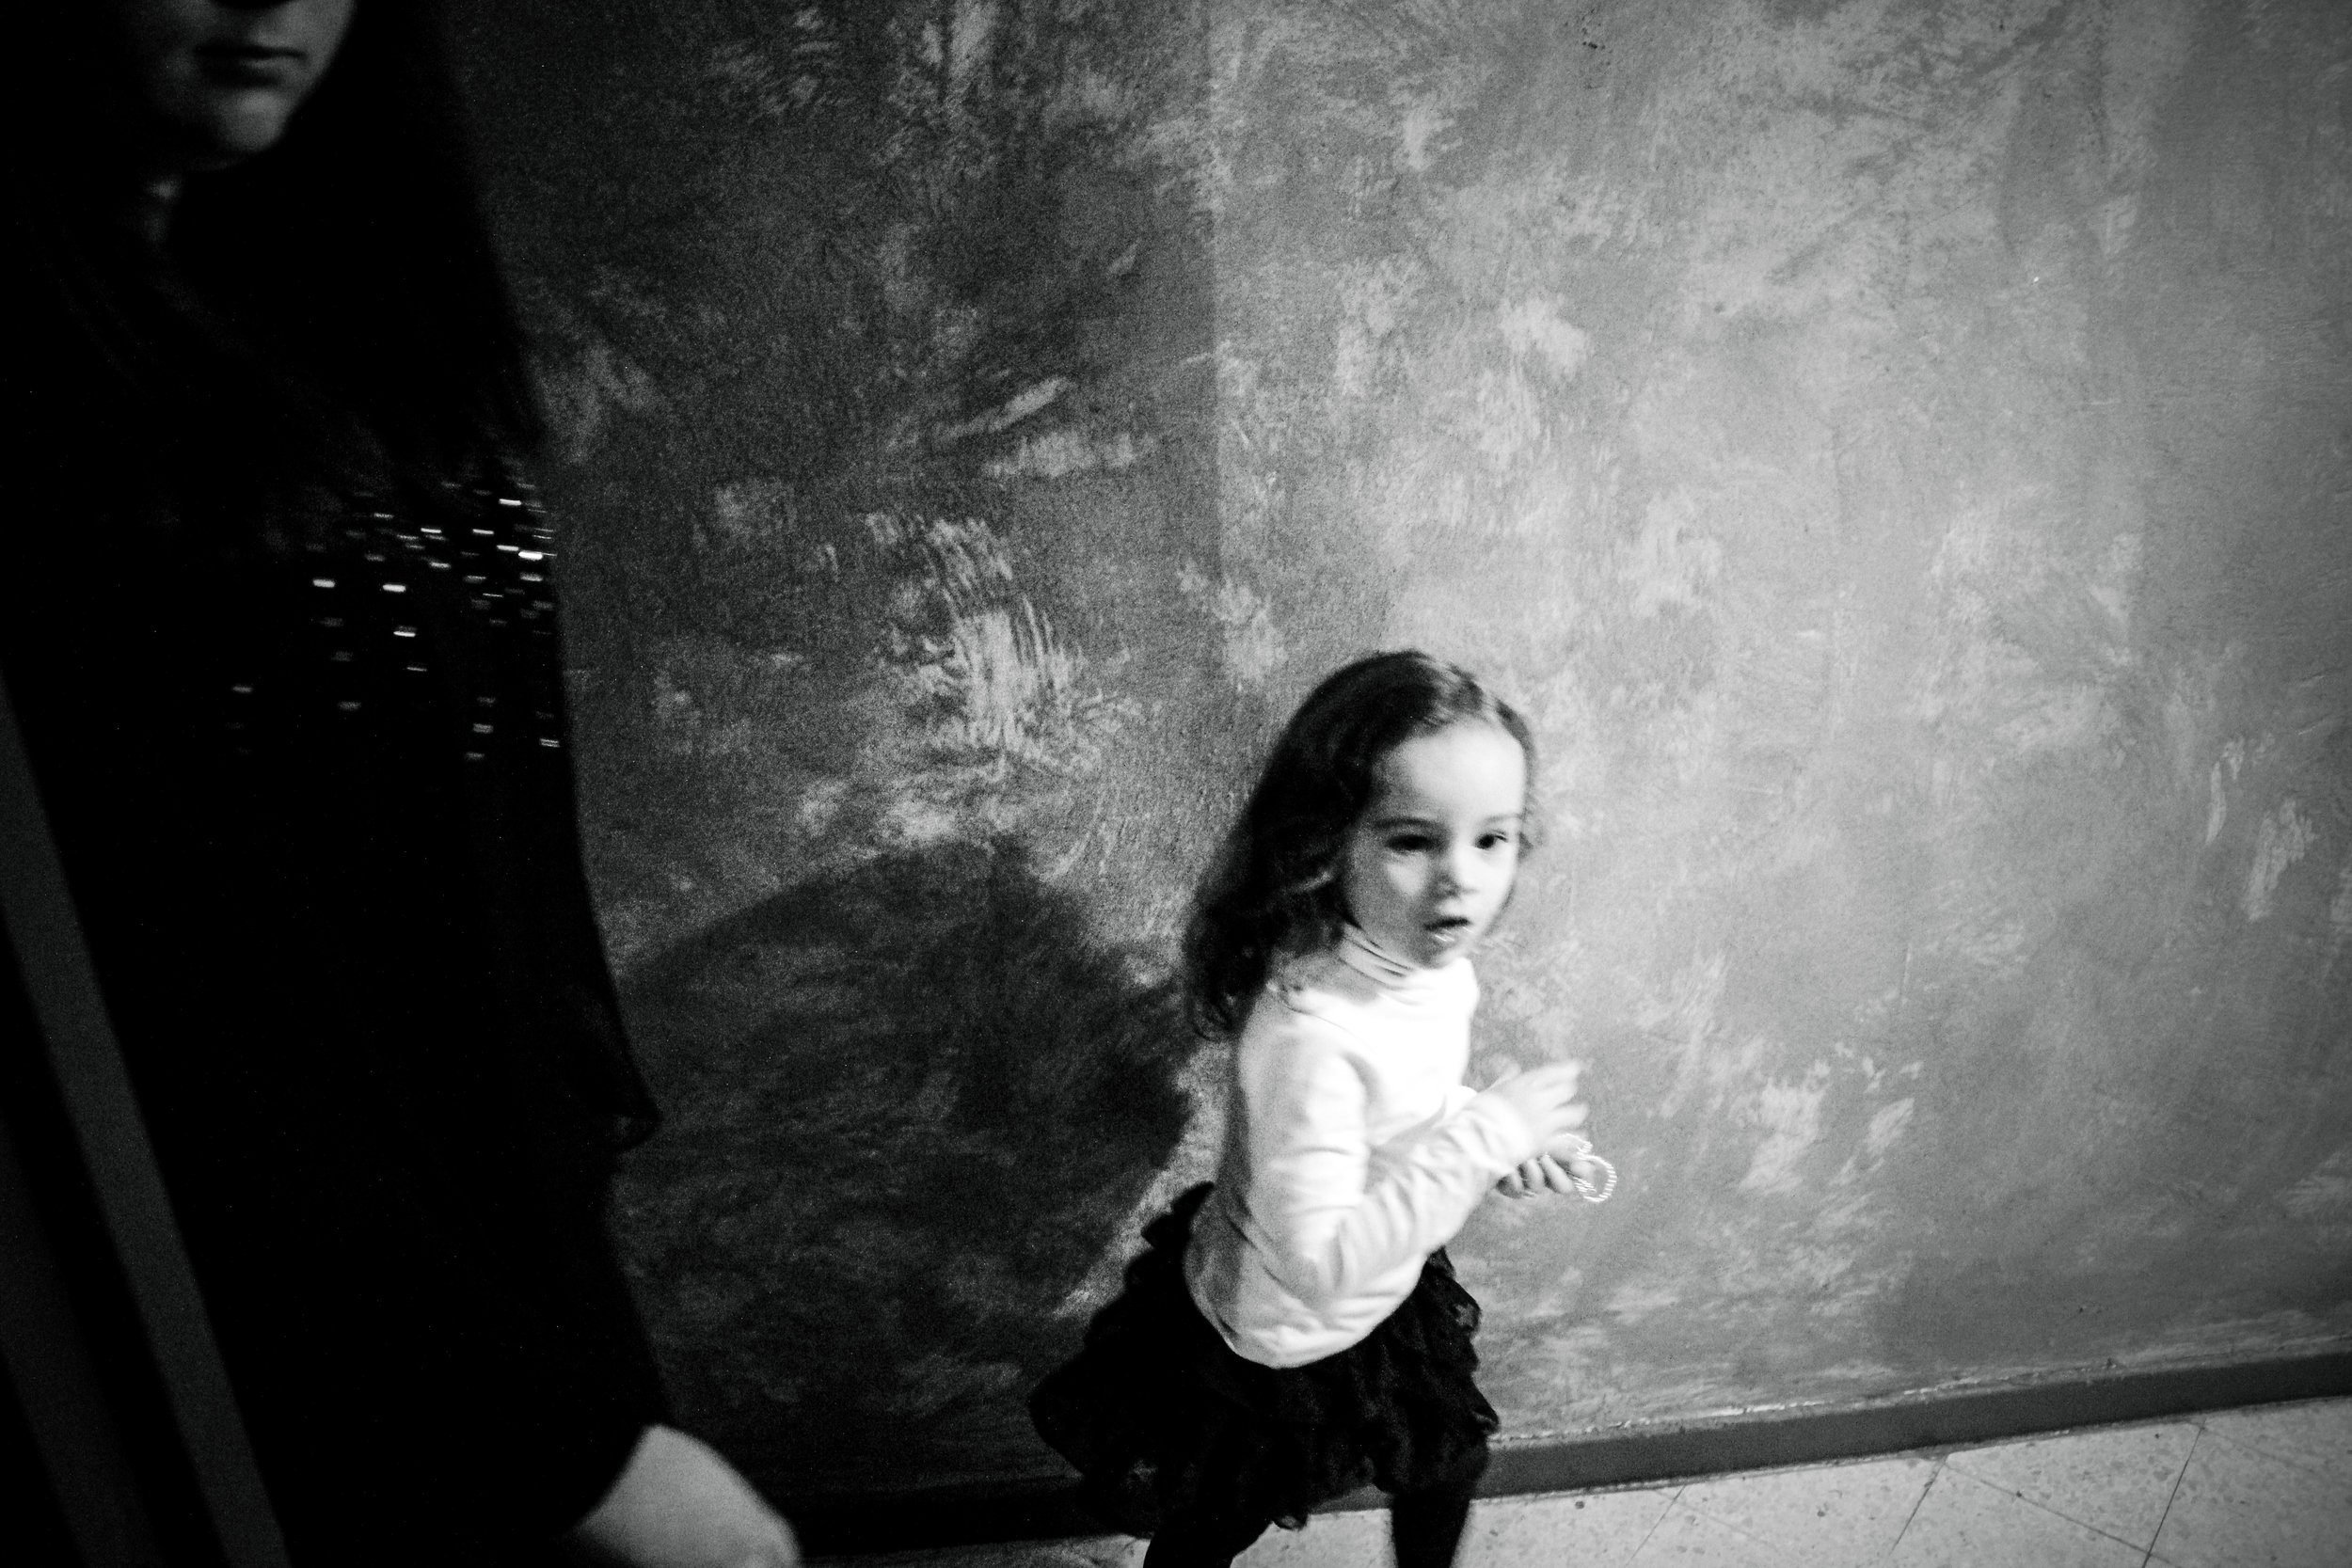  France, Marseille, 08 December 2012

A little girl runs to see the bride's "Tasdira" with new dresses. The bride will wear several looks during the party: the higher the social level of the family, the more the dresses the bride will have to wear.

